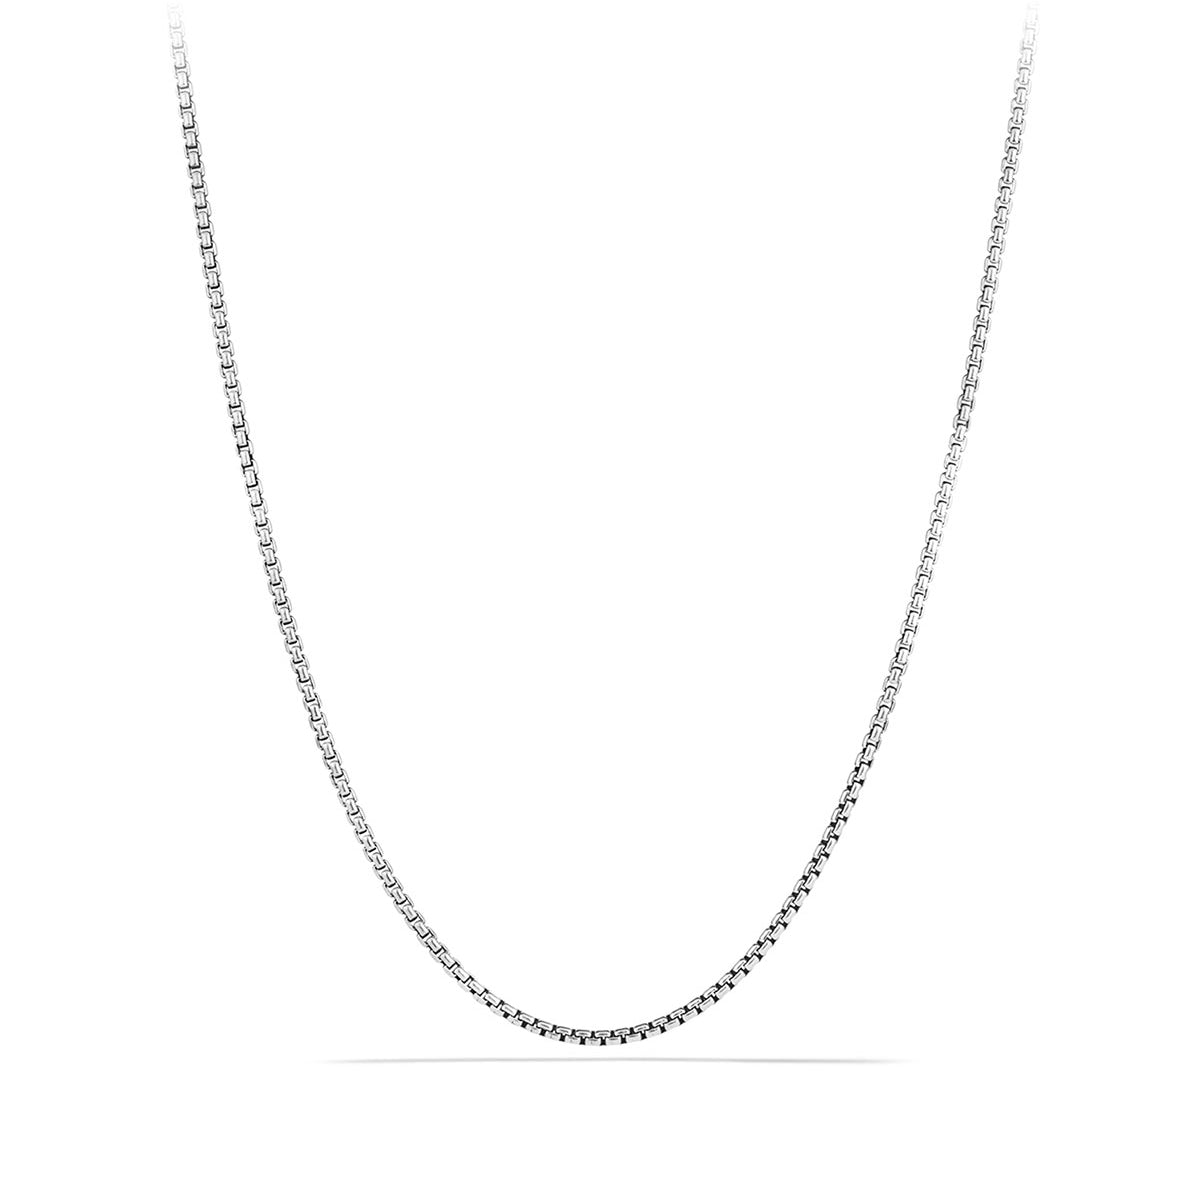 Box Necklace Chain for Men or Women by Ginger Lyne 925 Sterling Silver  20 Inch - Chain-20 Inch